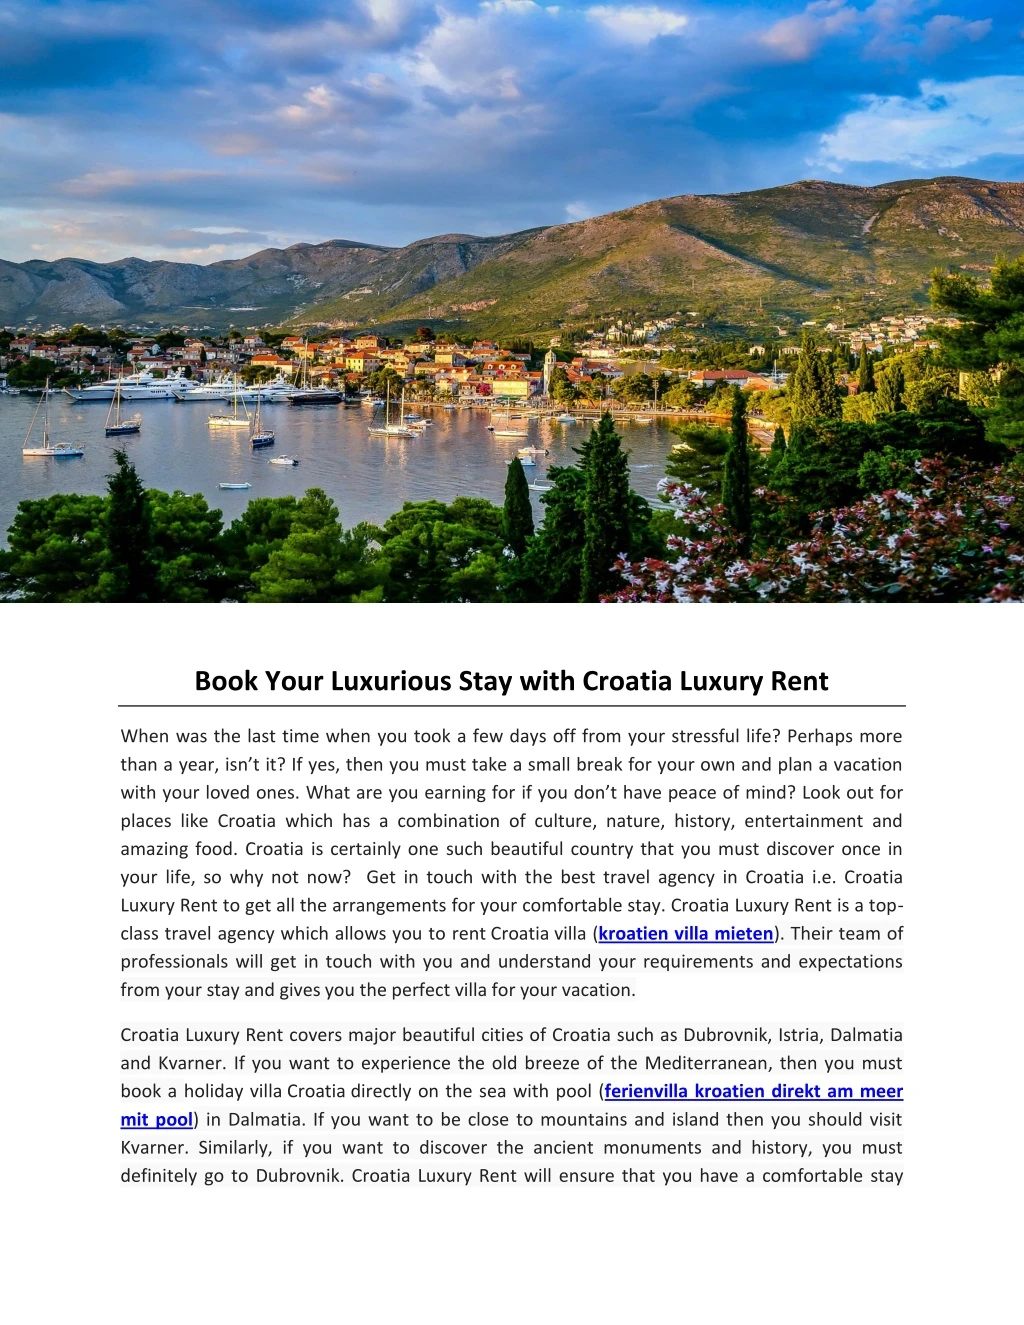 book your luxurious stay with croatia luxury rent